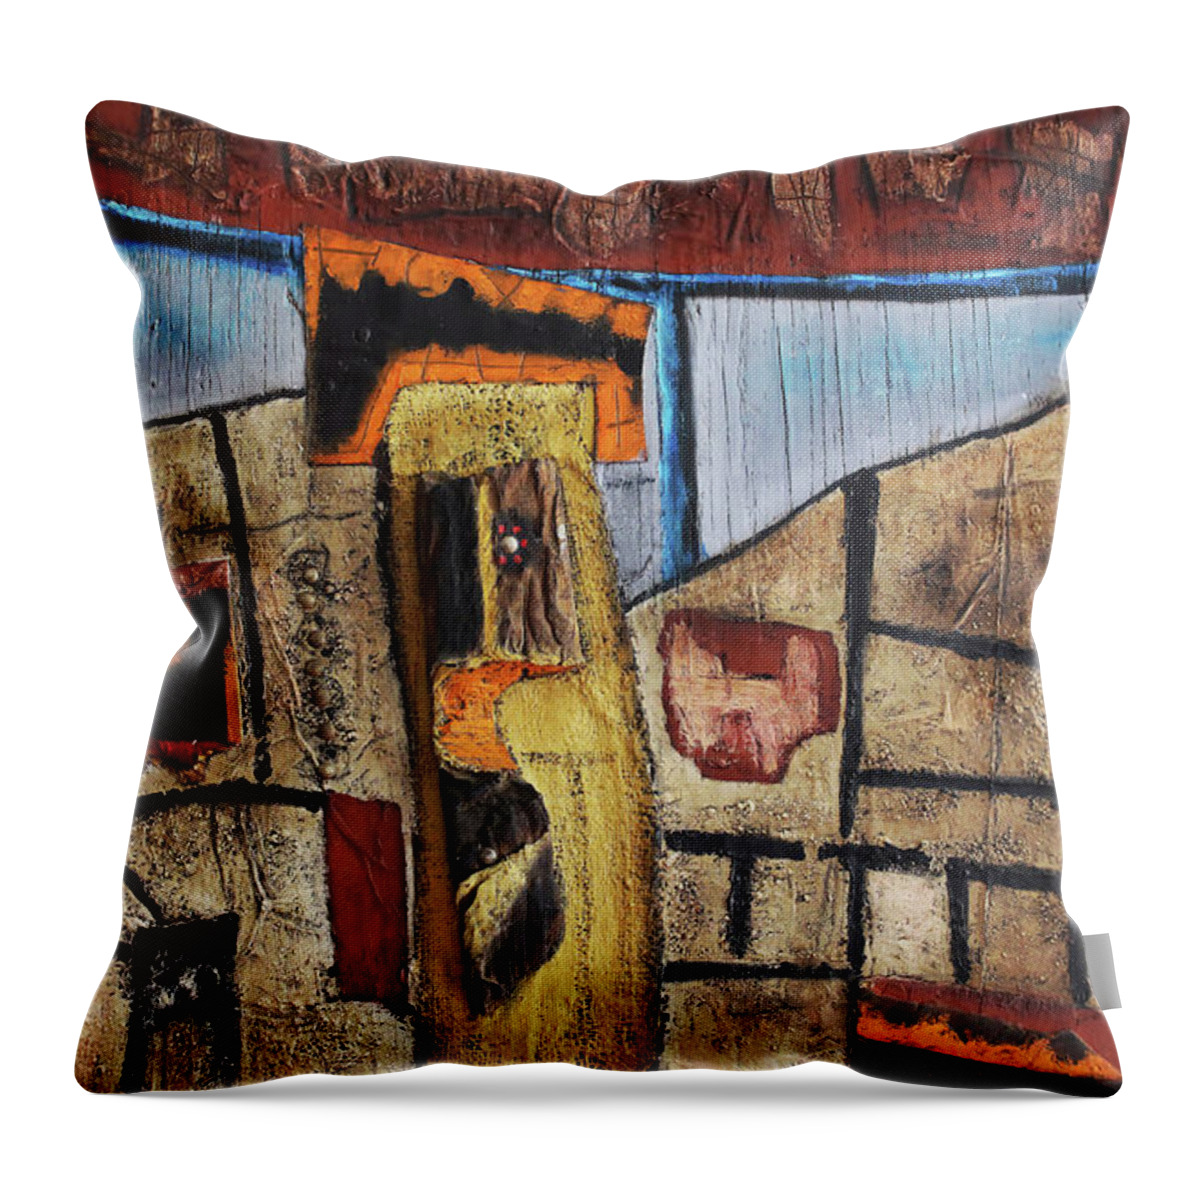 African Art Throw Pillow featuring the painting High Tower by Michael Nene